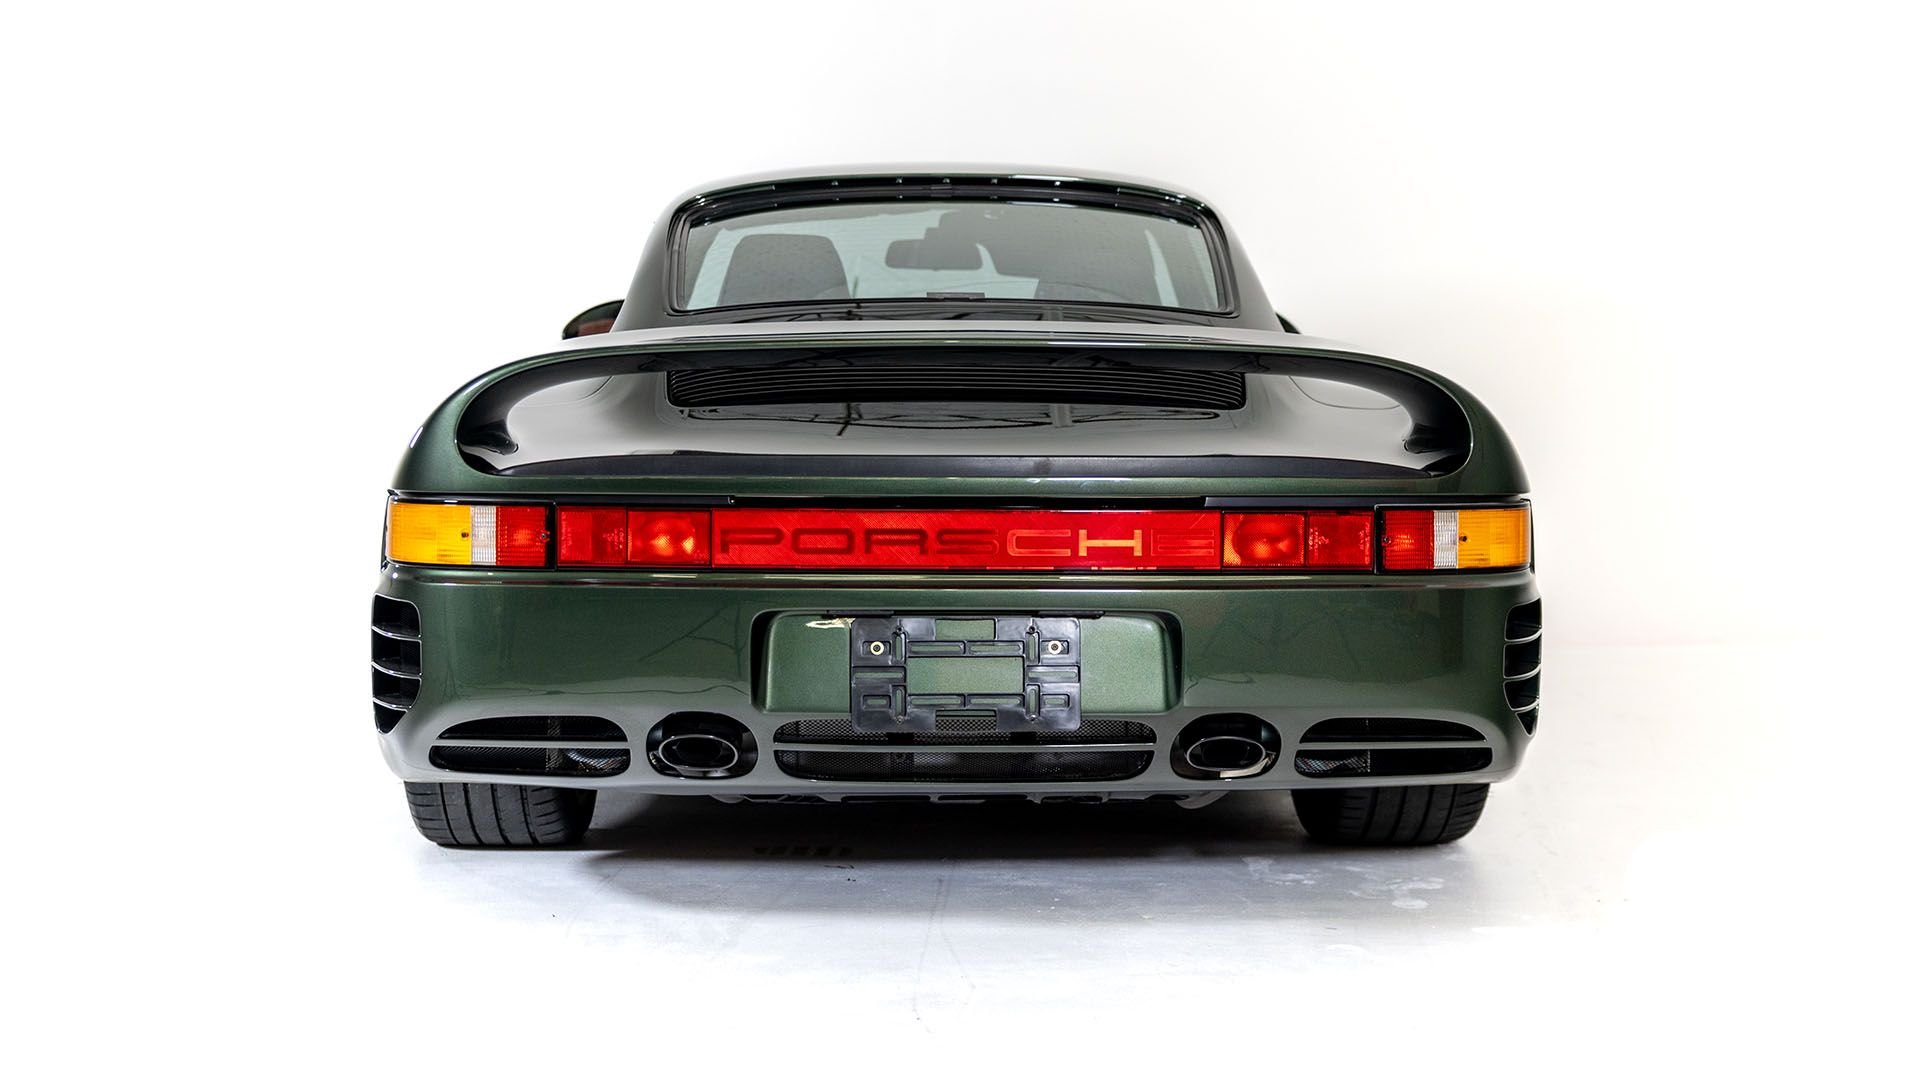 For Sale 1988 Porsche 959 SC Reimagined by Canepa